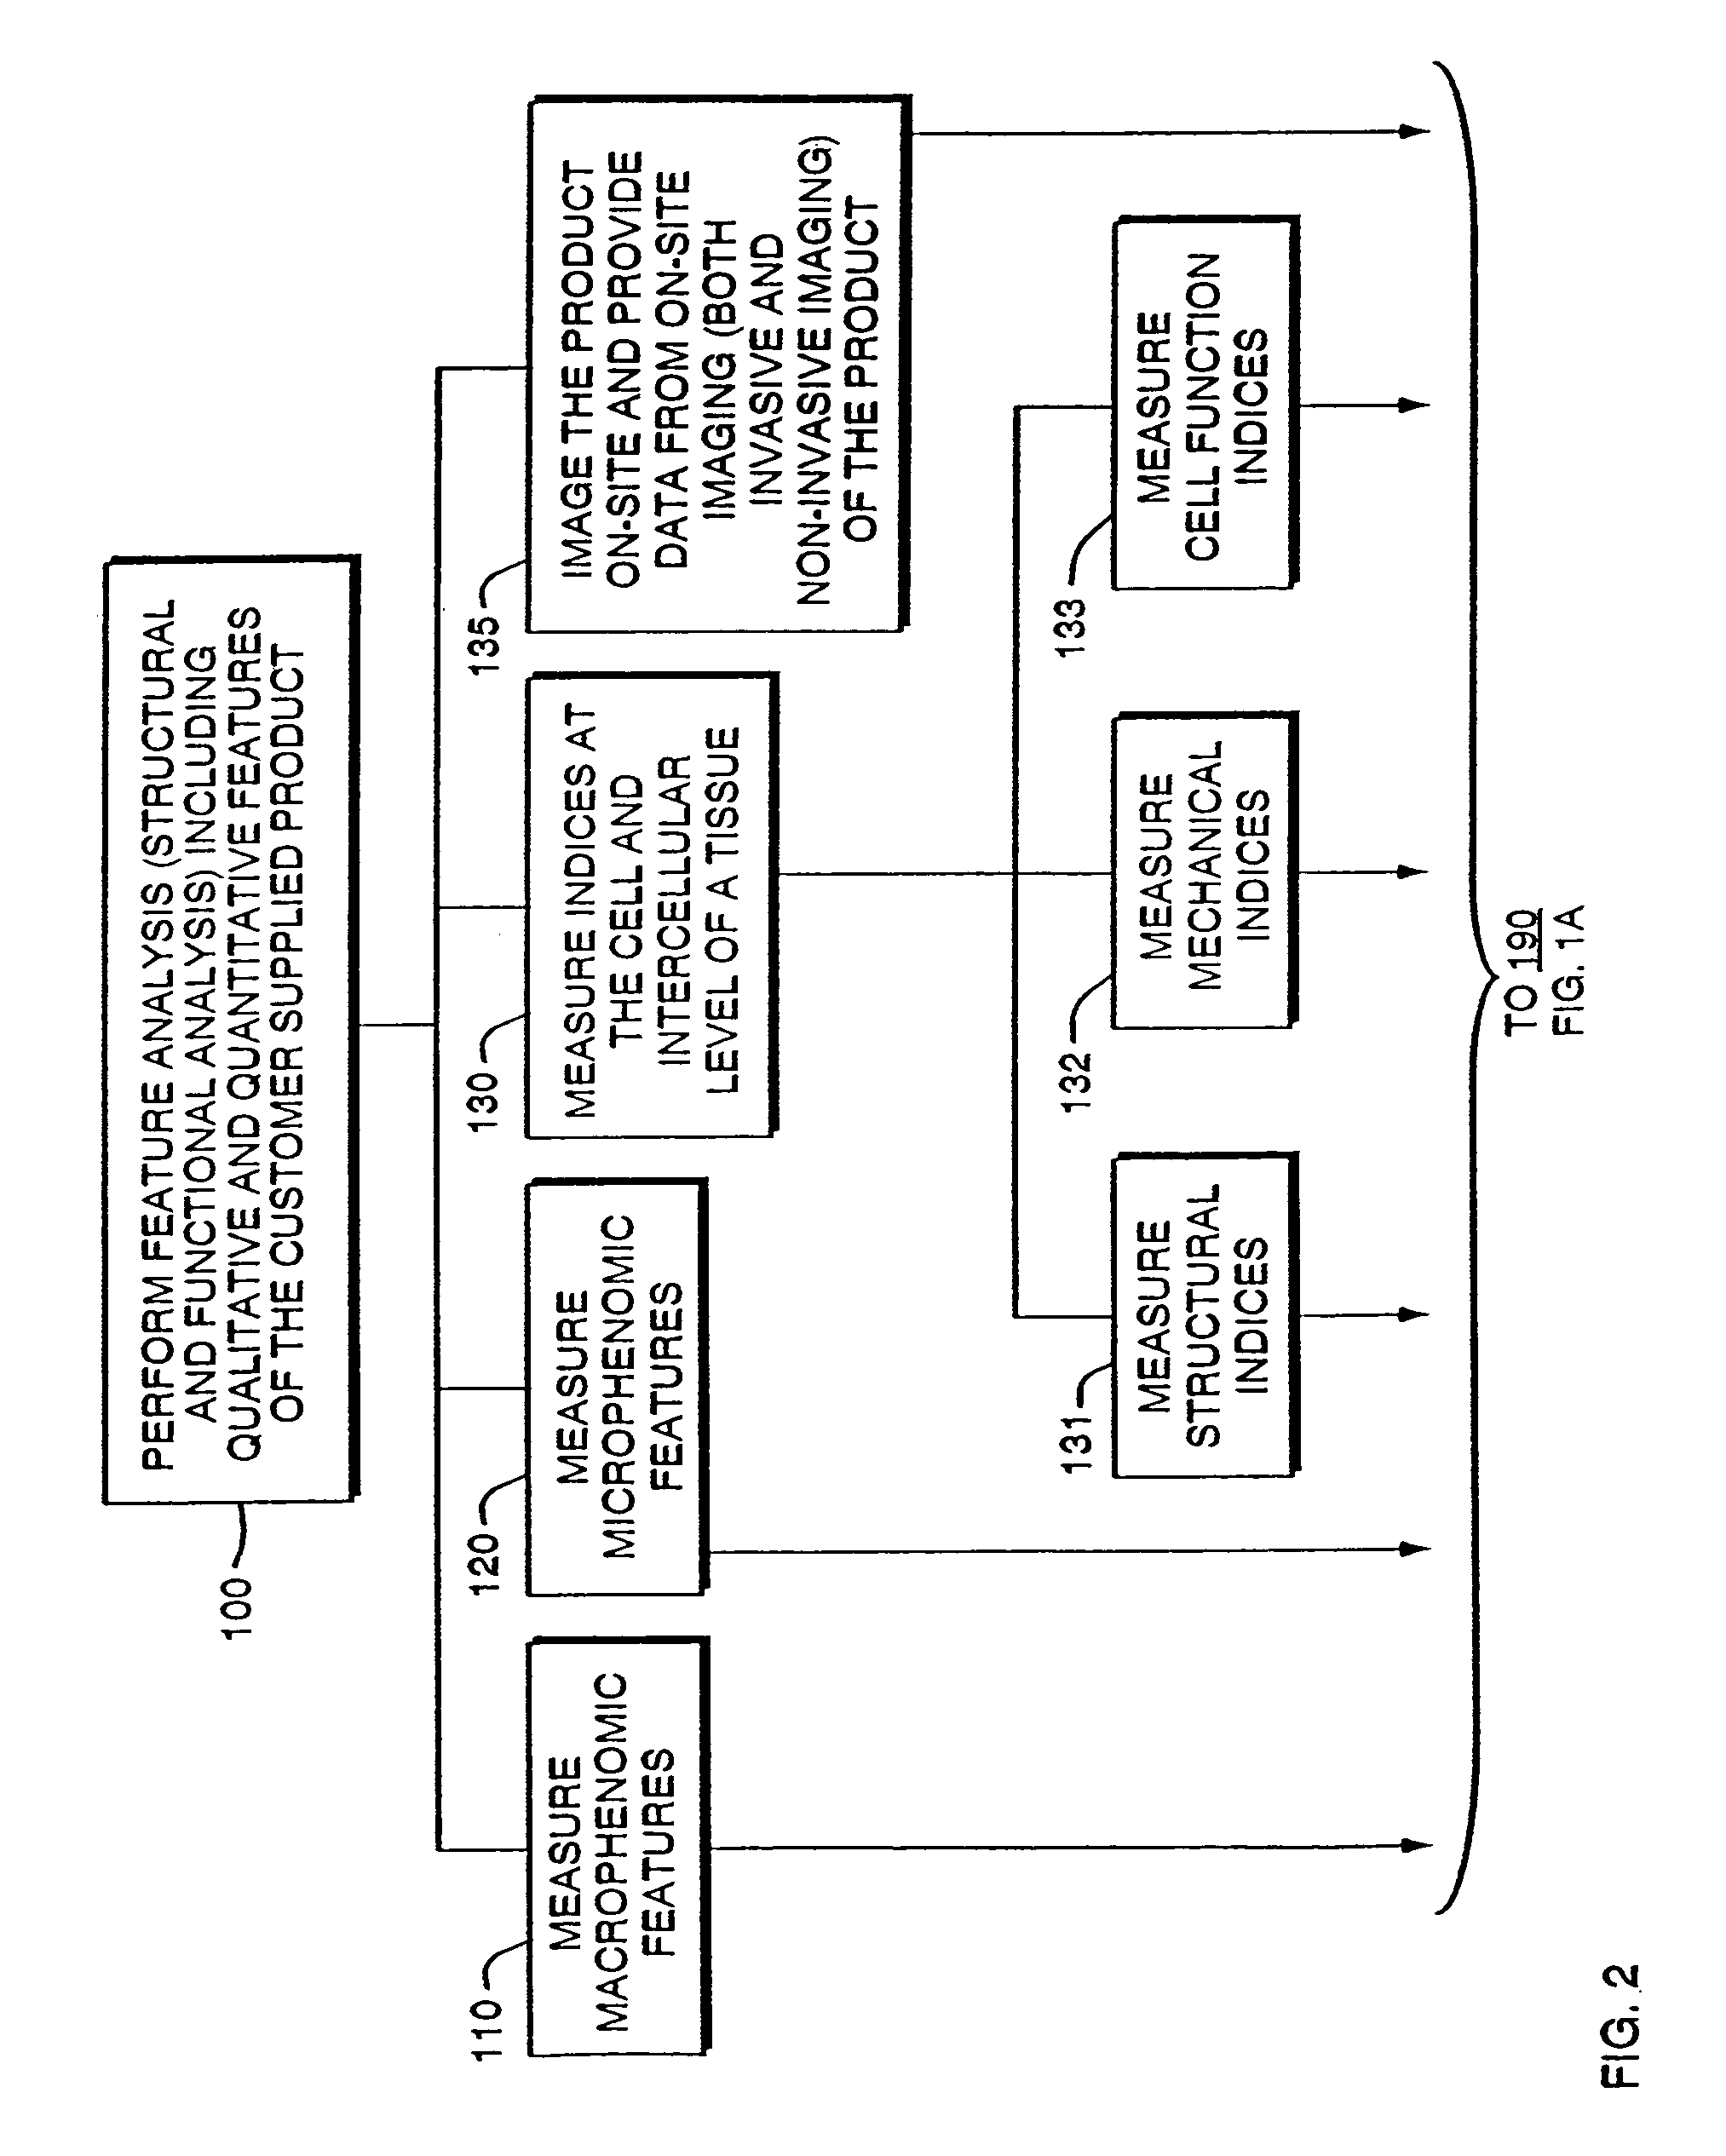 Method and information system for non-random selection of uniform structural and functional features for tissue and plant product processing